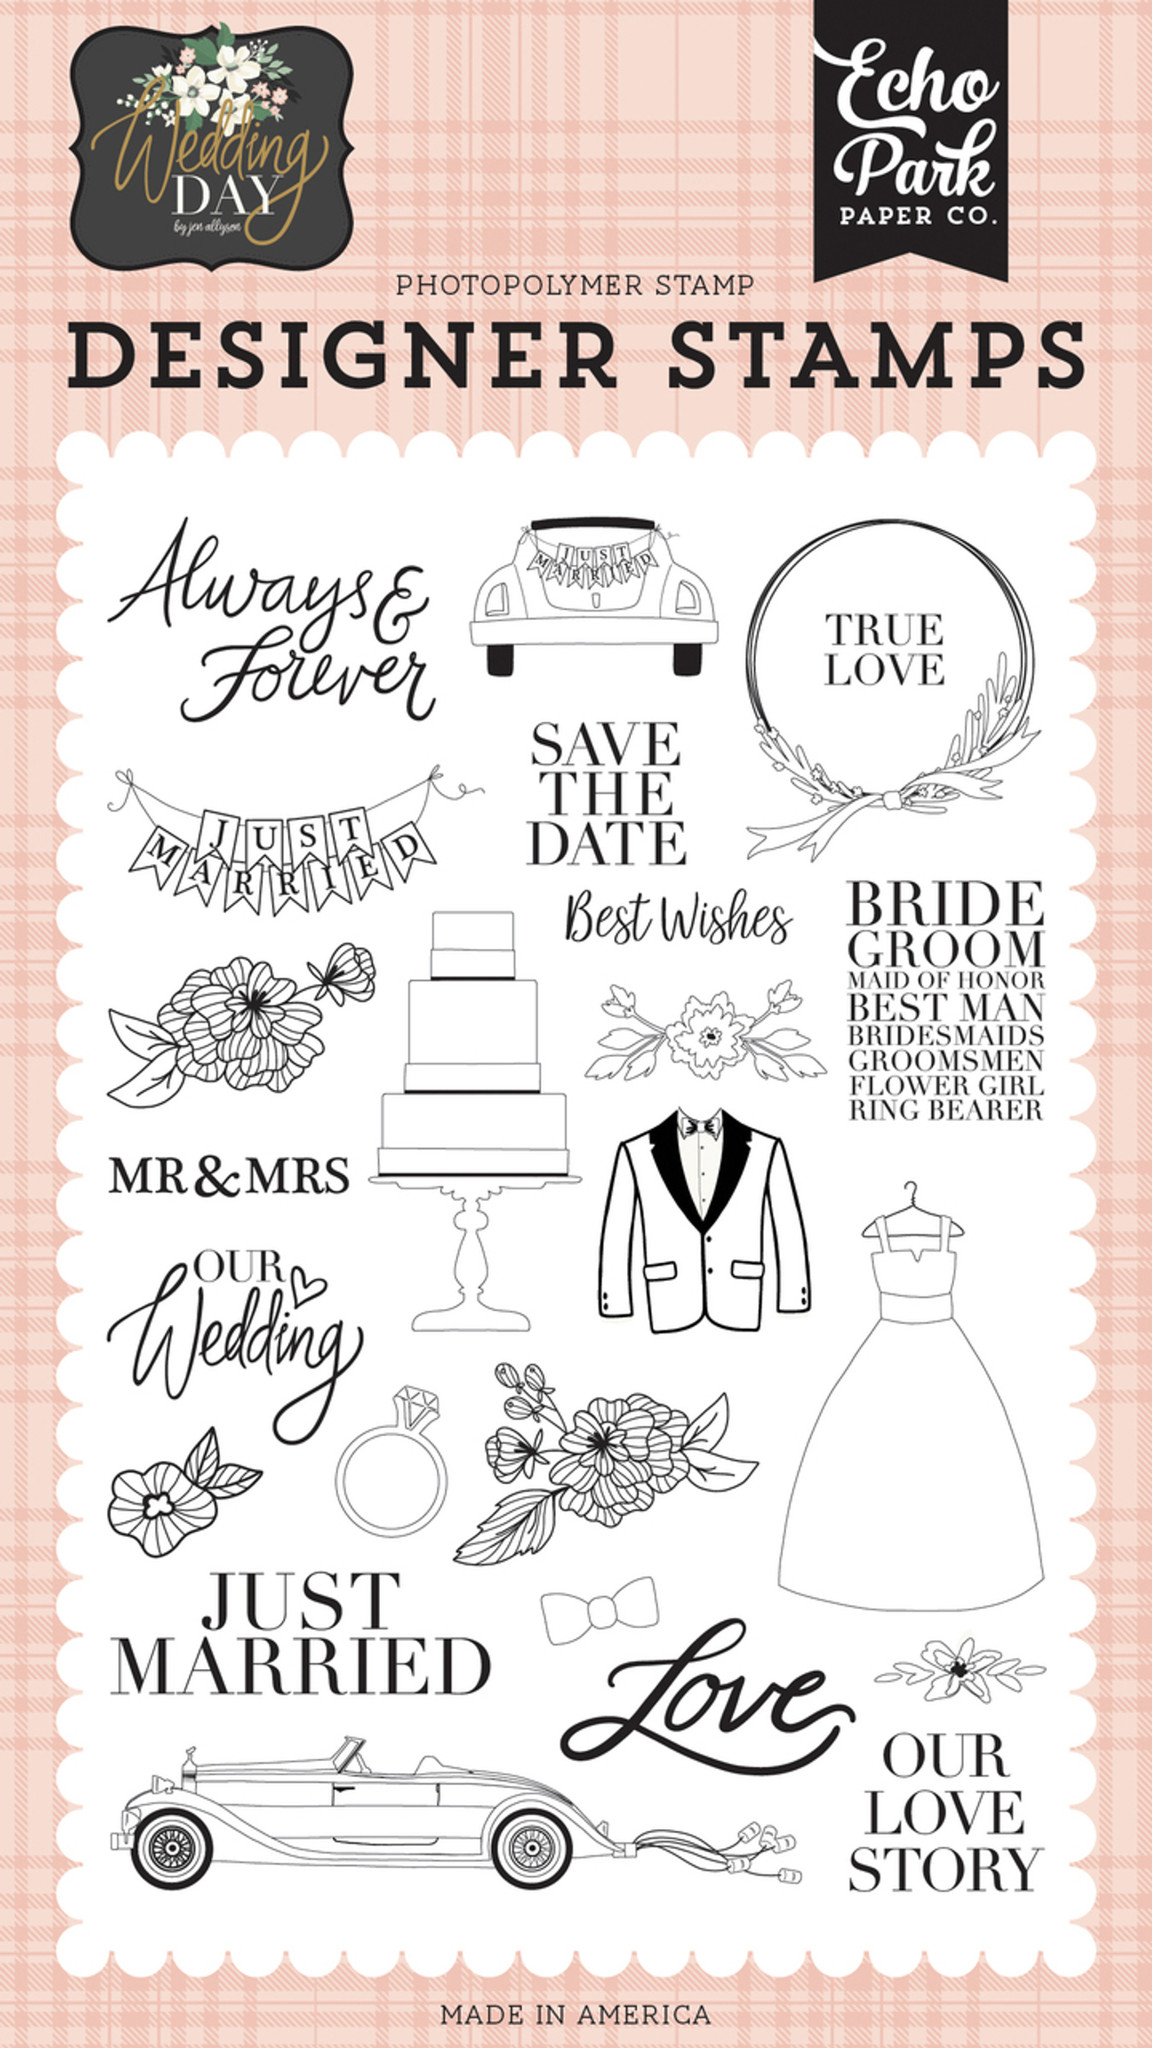 Wedding Day: Our Love Story Stamp Set - Echo Park Paper Co.